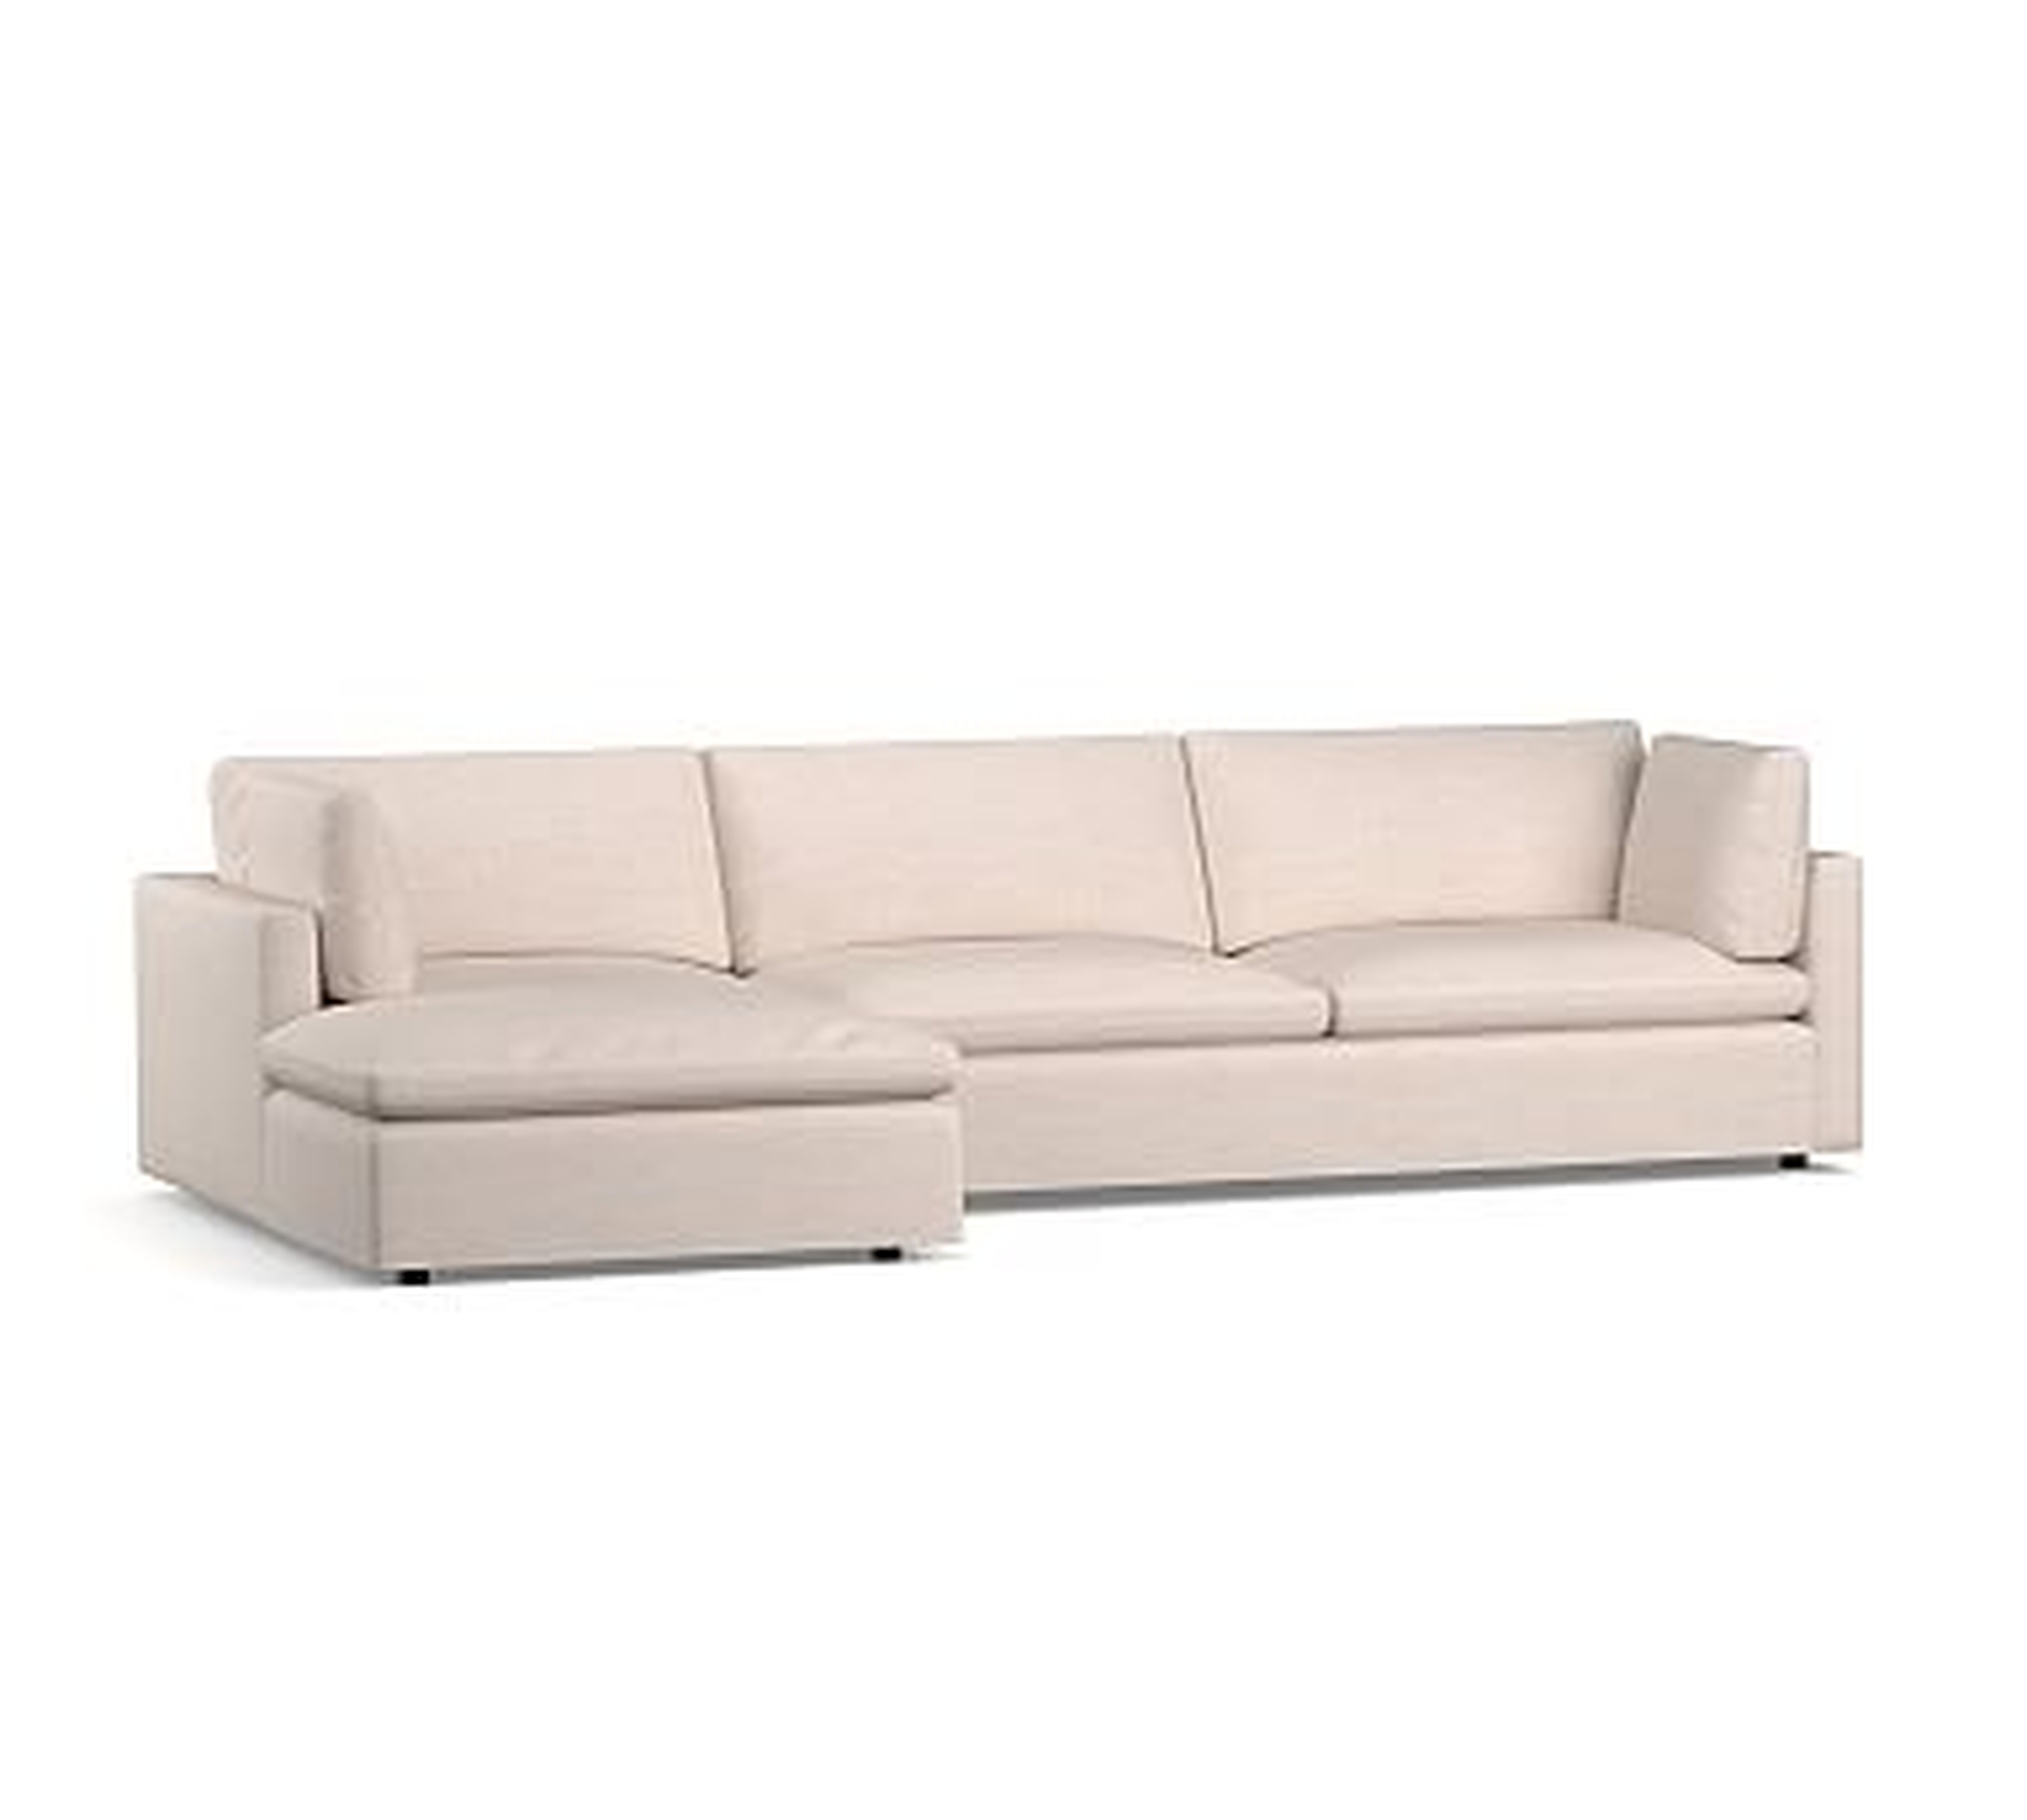 Bolinas Upholstered Right Arm Sofa with Chaise Sectional, Down Blend Wrapped Cushions, Performance Brushed Basketweave Oatmeal - Pottery Barn